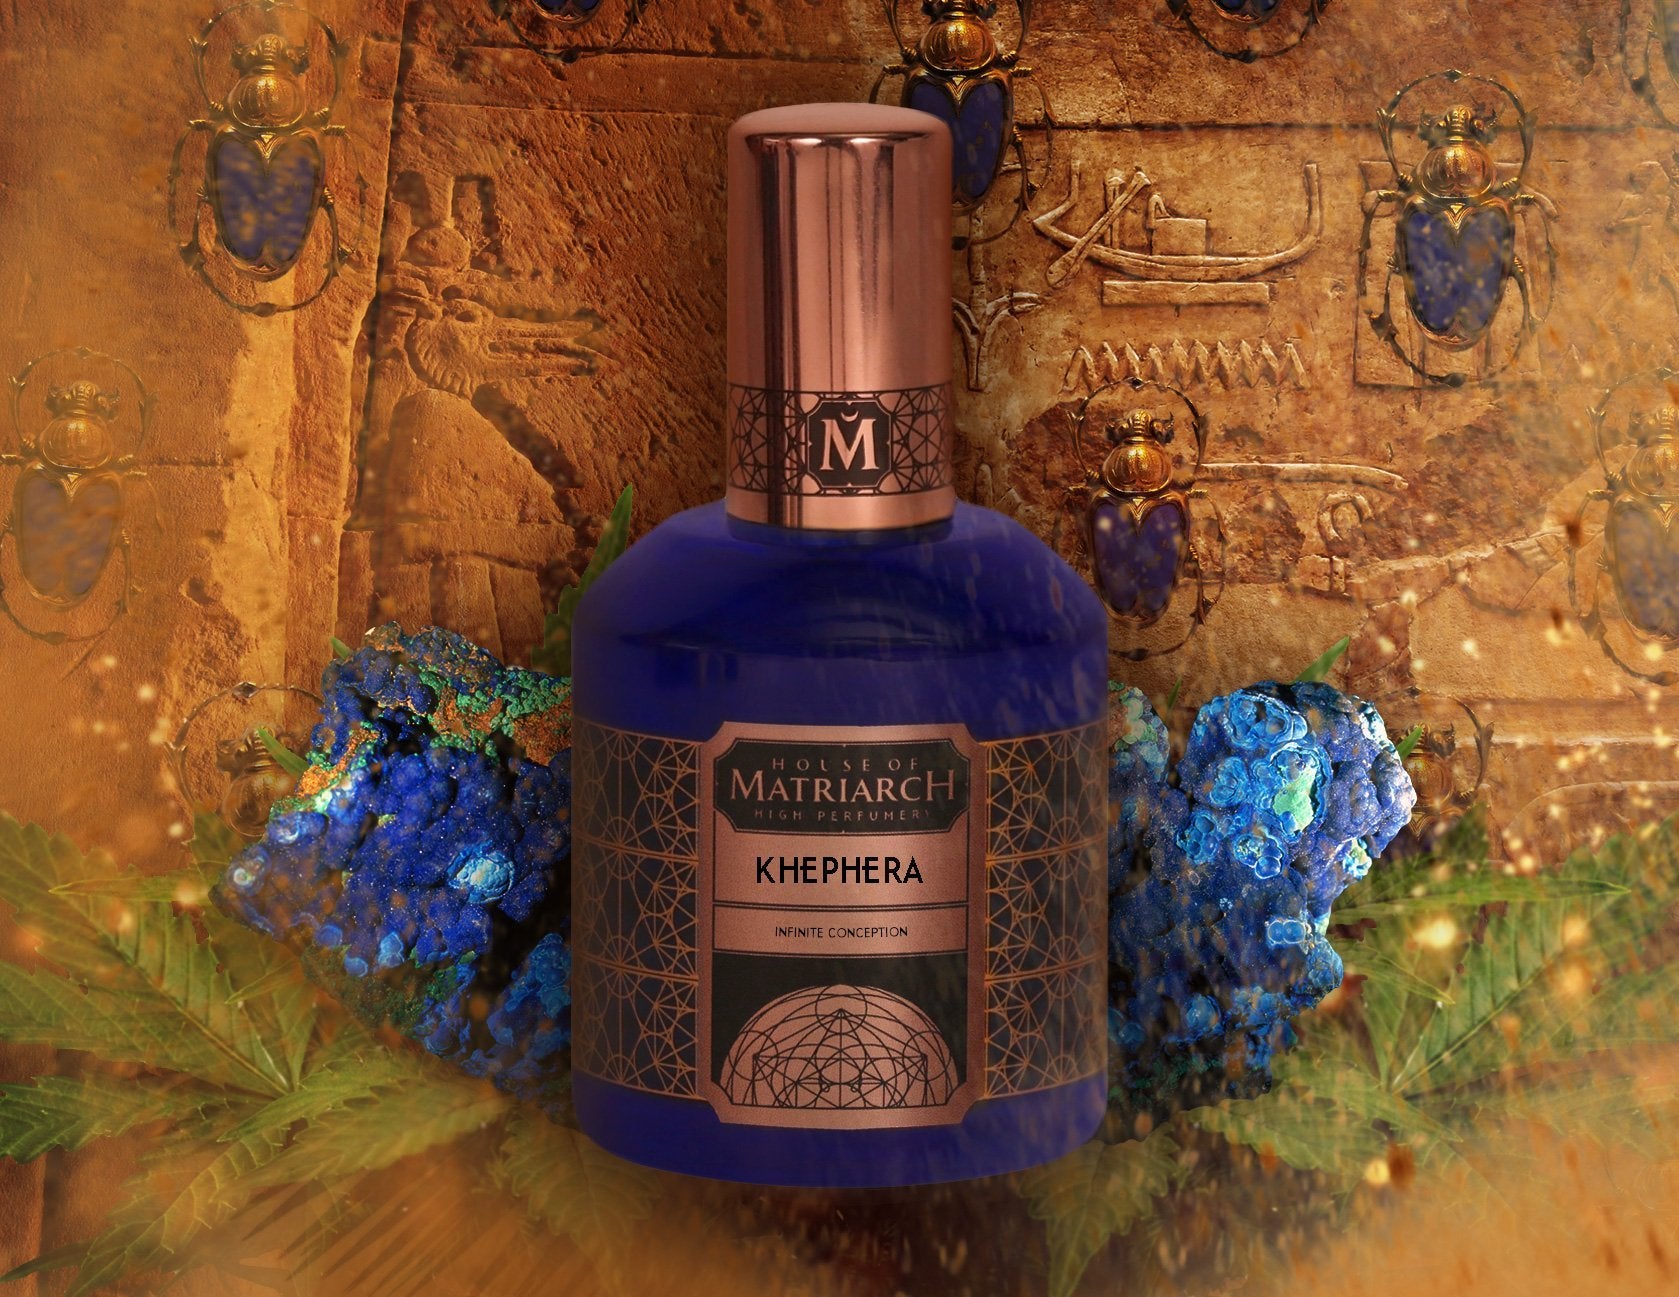 House of Matriarch Bittersweet Symphony Perfume Samples & Decants